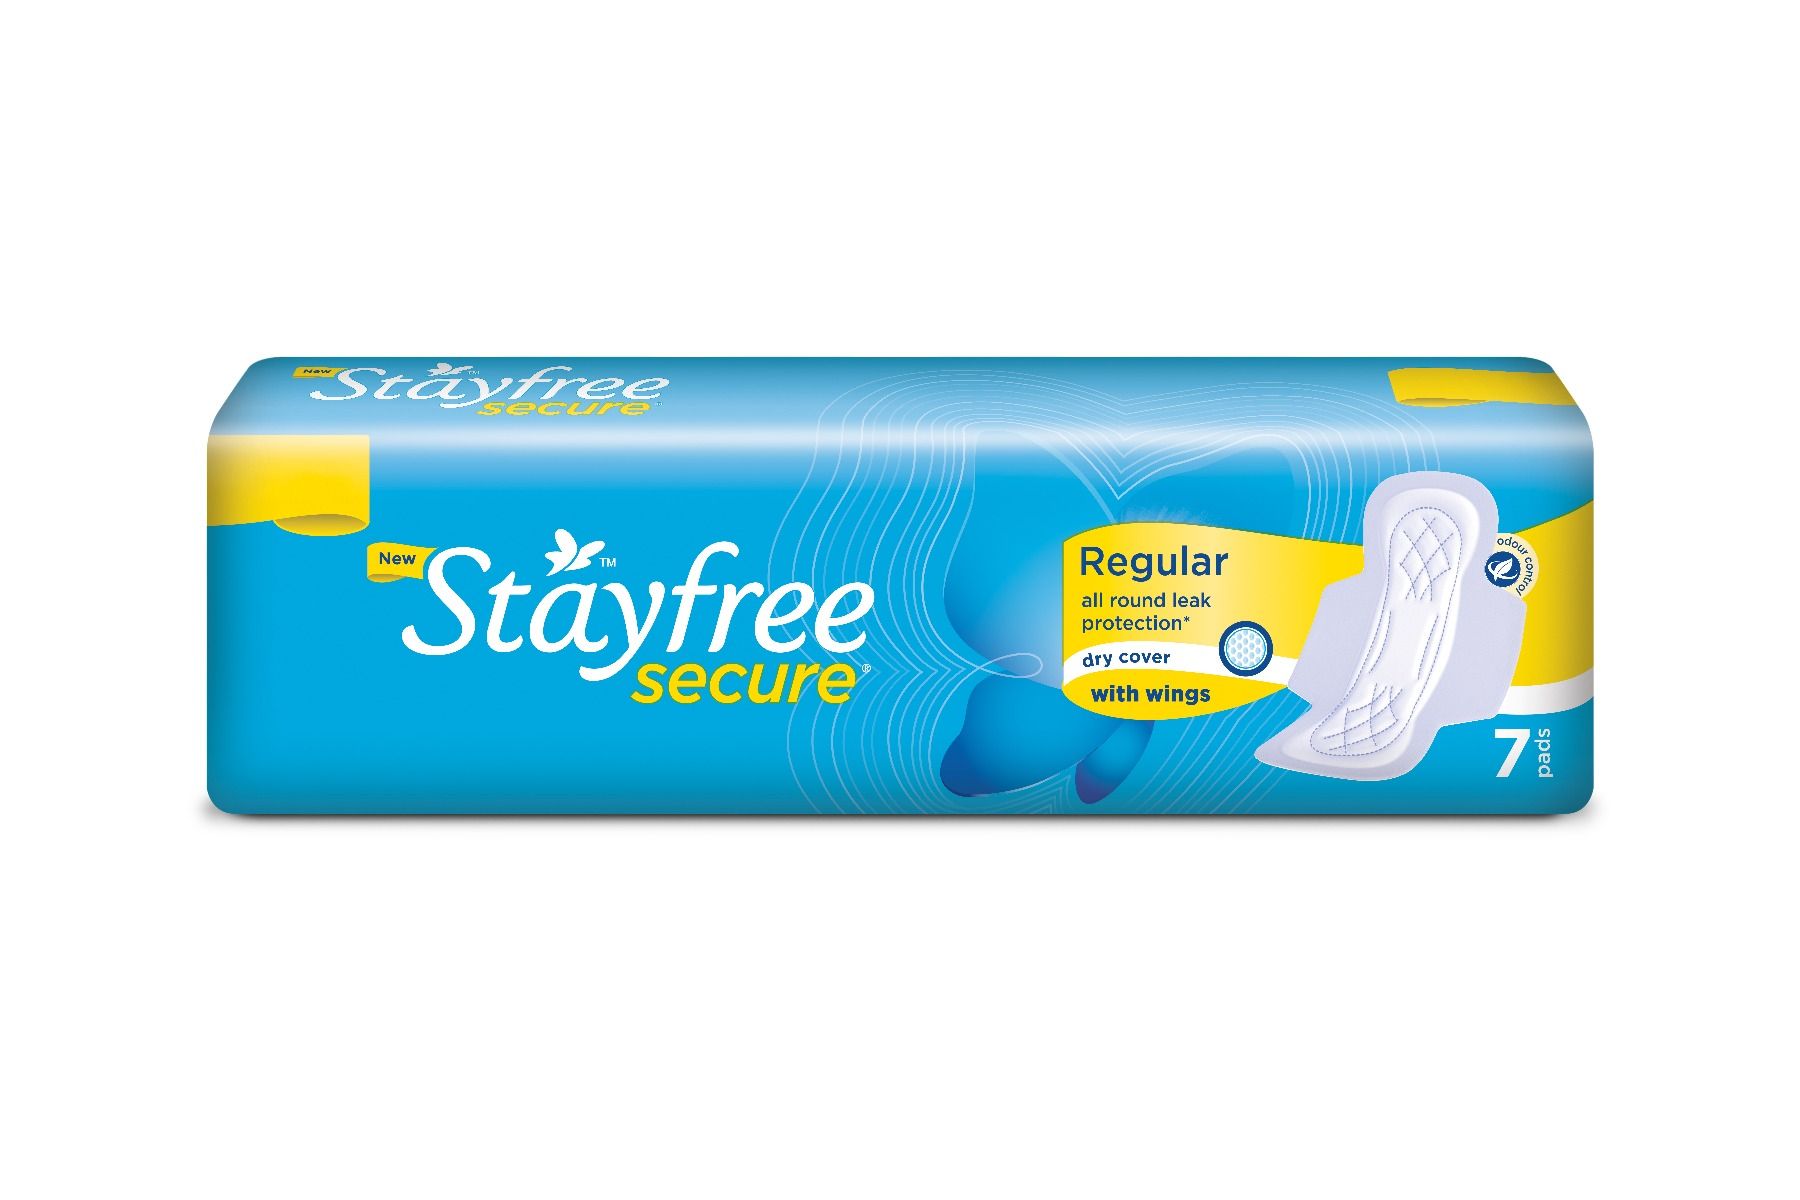 Stayfree Secure Dry Cover Pads With Wings Regular, 7 Count, Pack of 1 